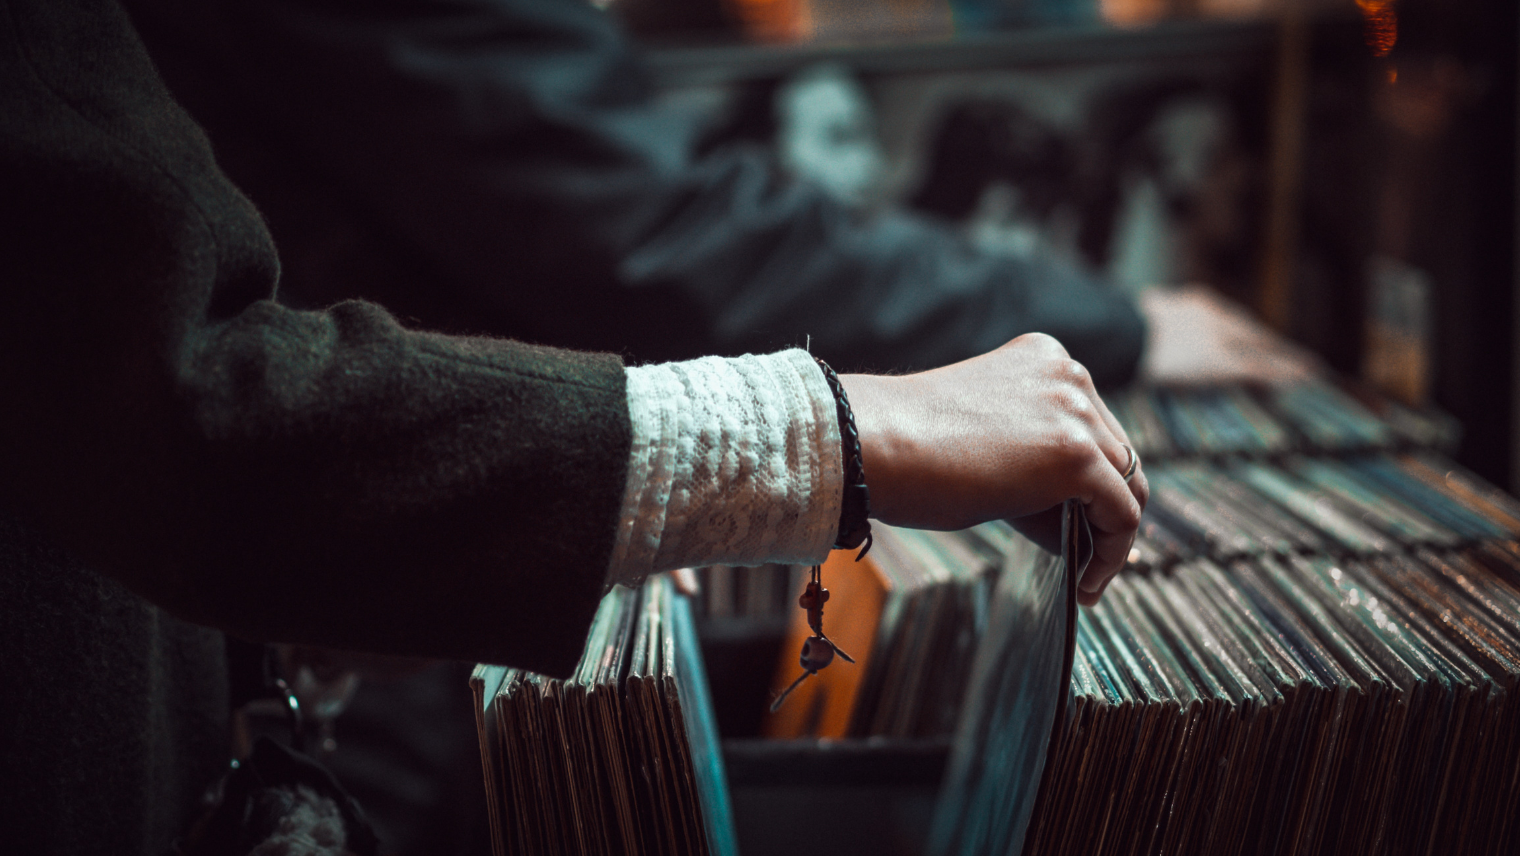 Image of people scrolling through records at a record store